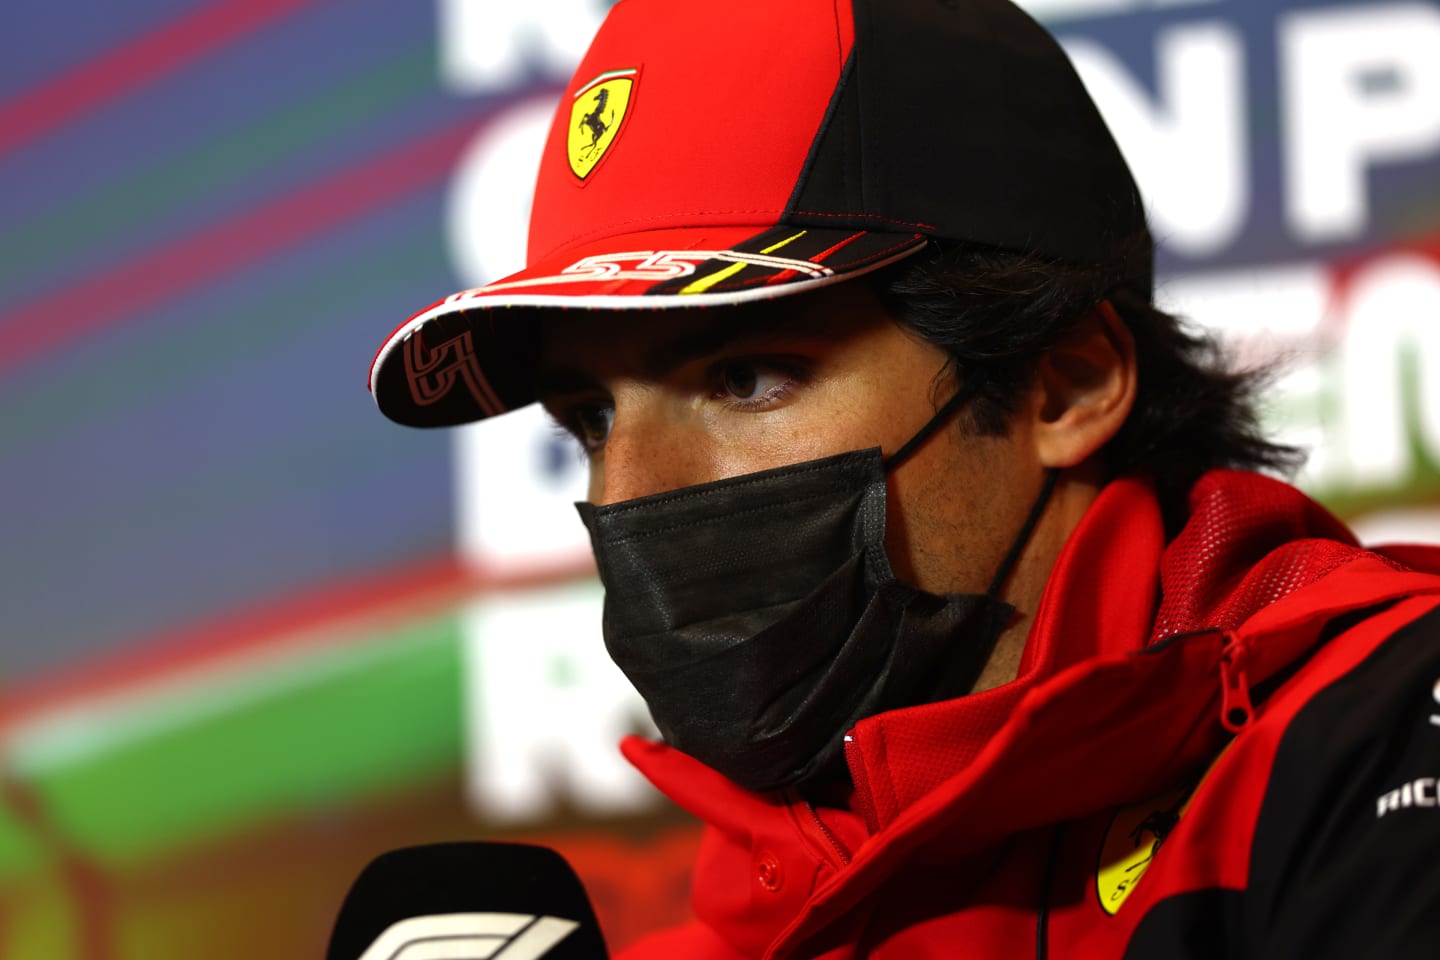 IMOLA, ITALY - APRIL 22: Carlos Sainz of Spain and Ferrari talks in the Drivers Press Conference prior to practice ahead of the F1 Grand Prix of Emilia Romagna at Autodromo Enzo e Dino Ferrari on April 22, 2022 in Imola, Italy. (Photo by Lars Baron/Getty Images)